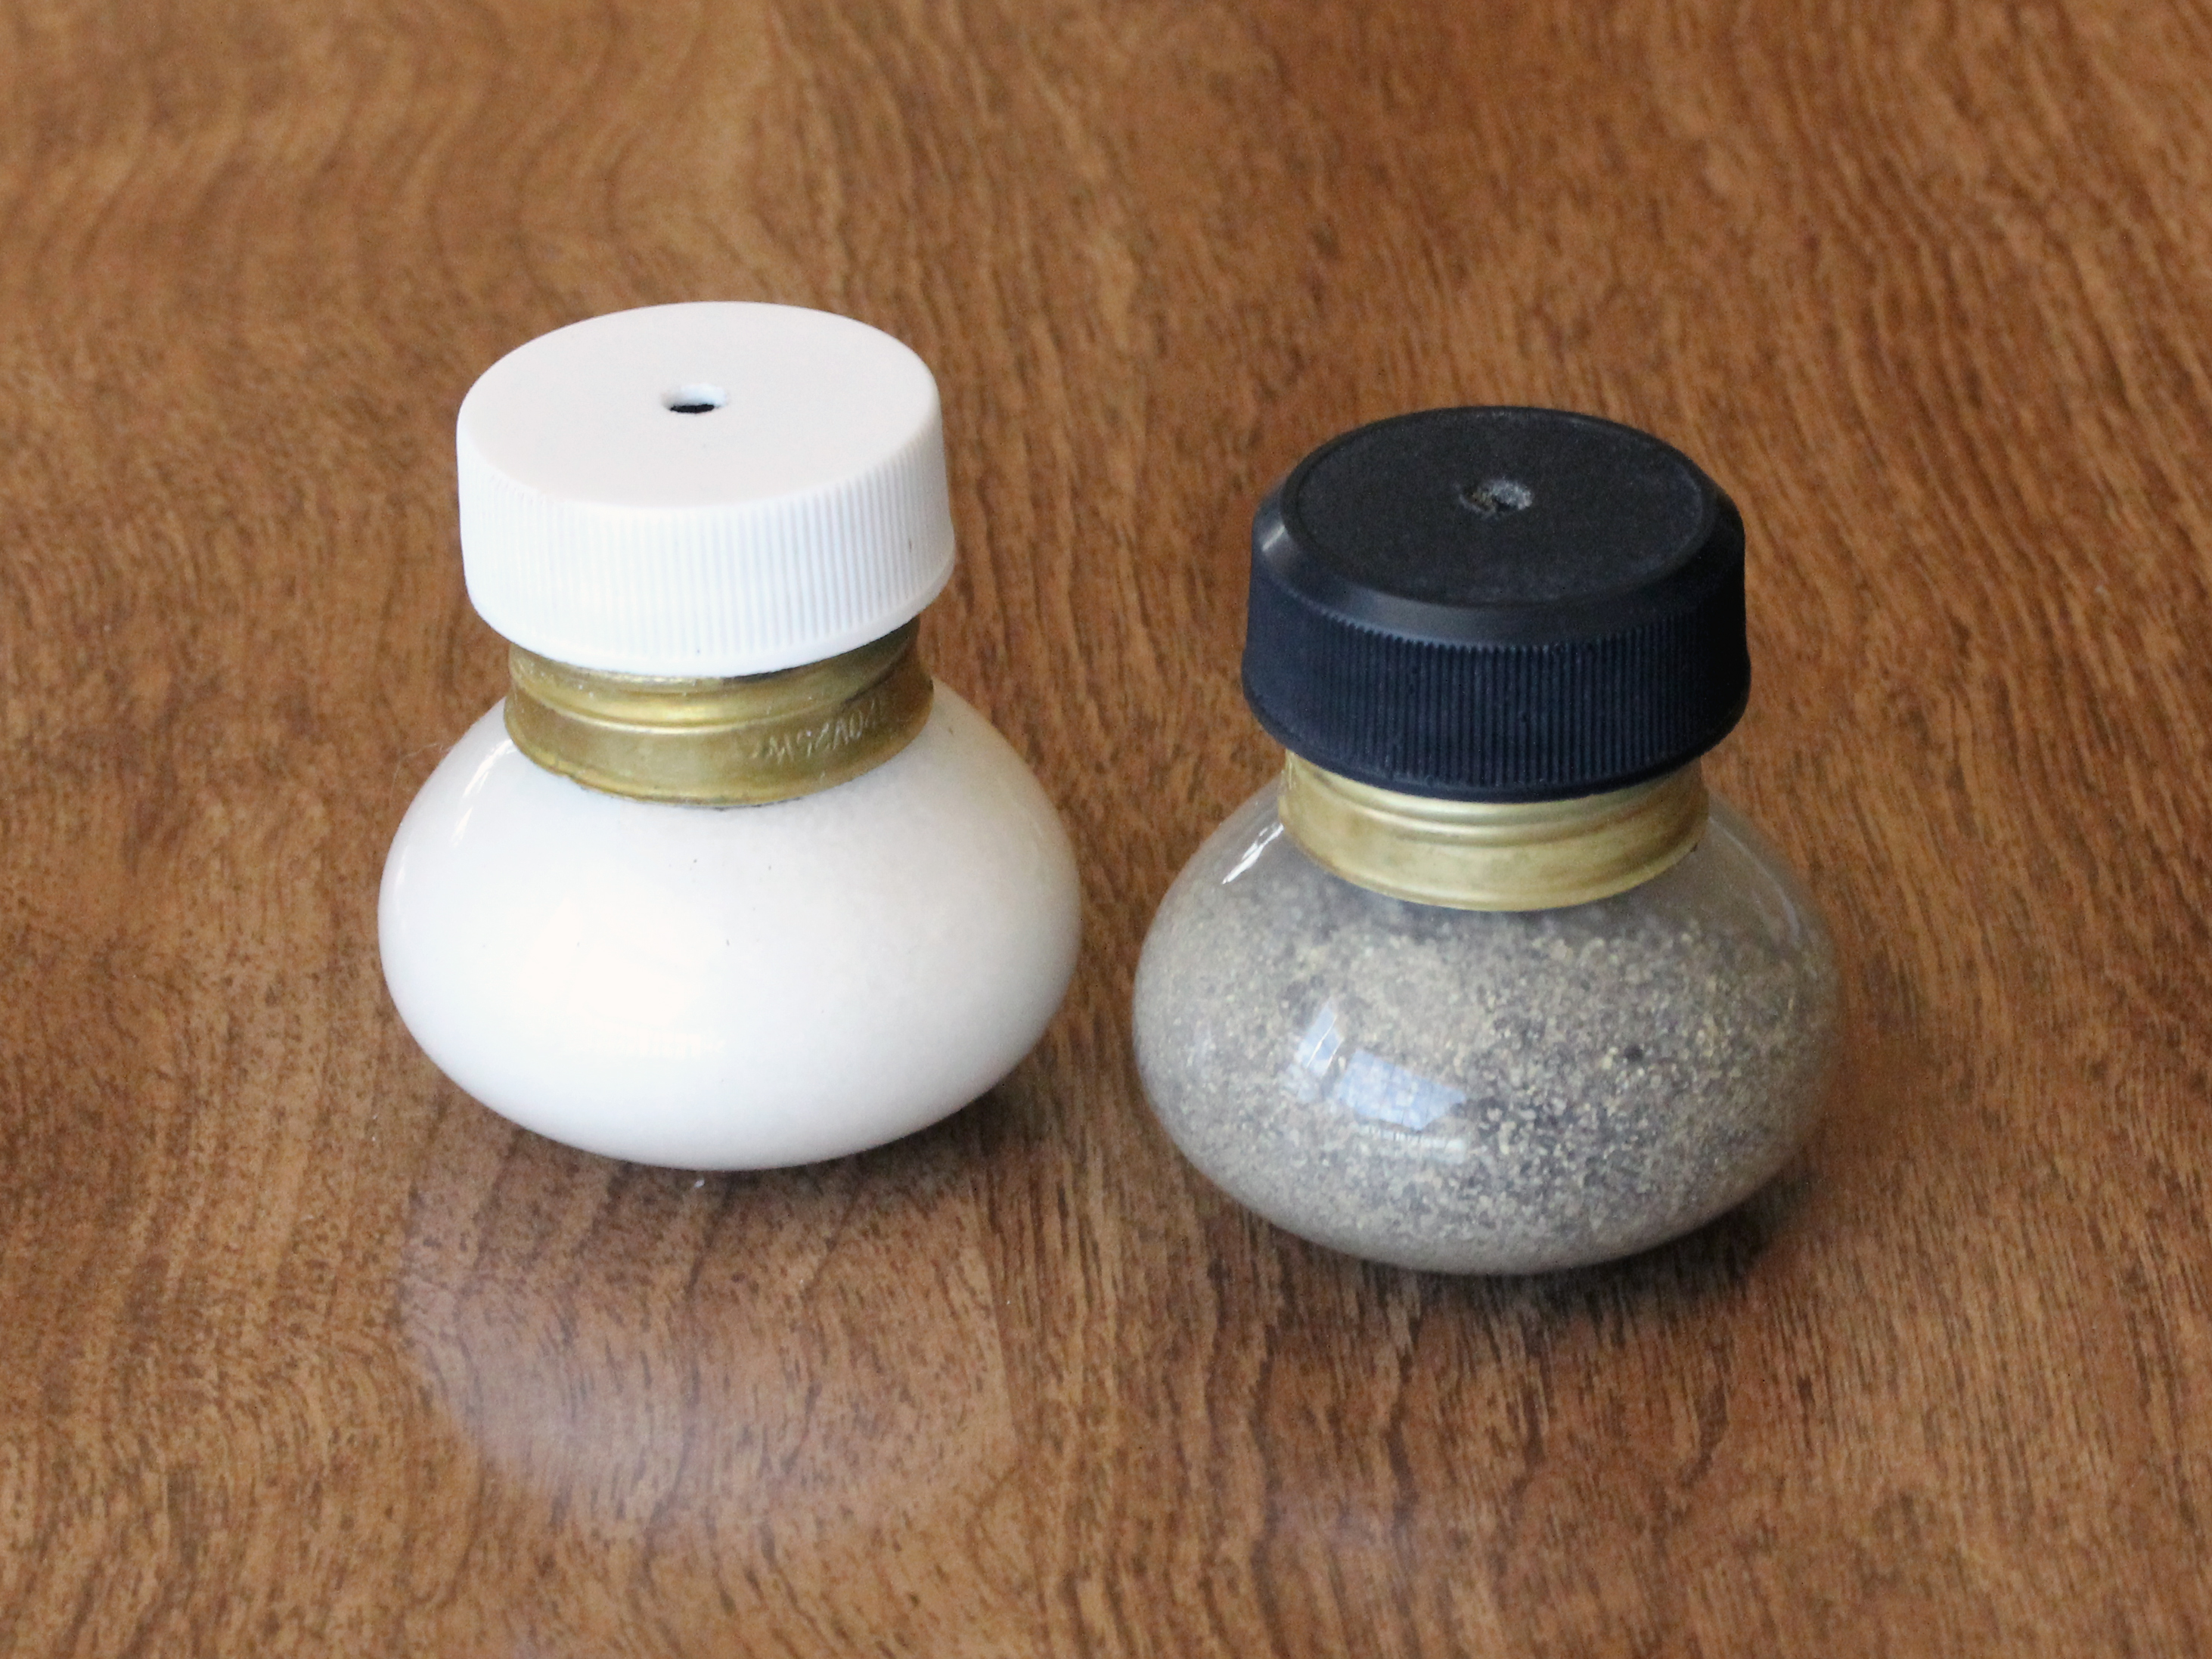 Salt-and-pepper shaker set made from small "floodlight" style light bulbs and two soda bottle caps.